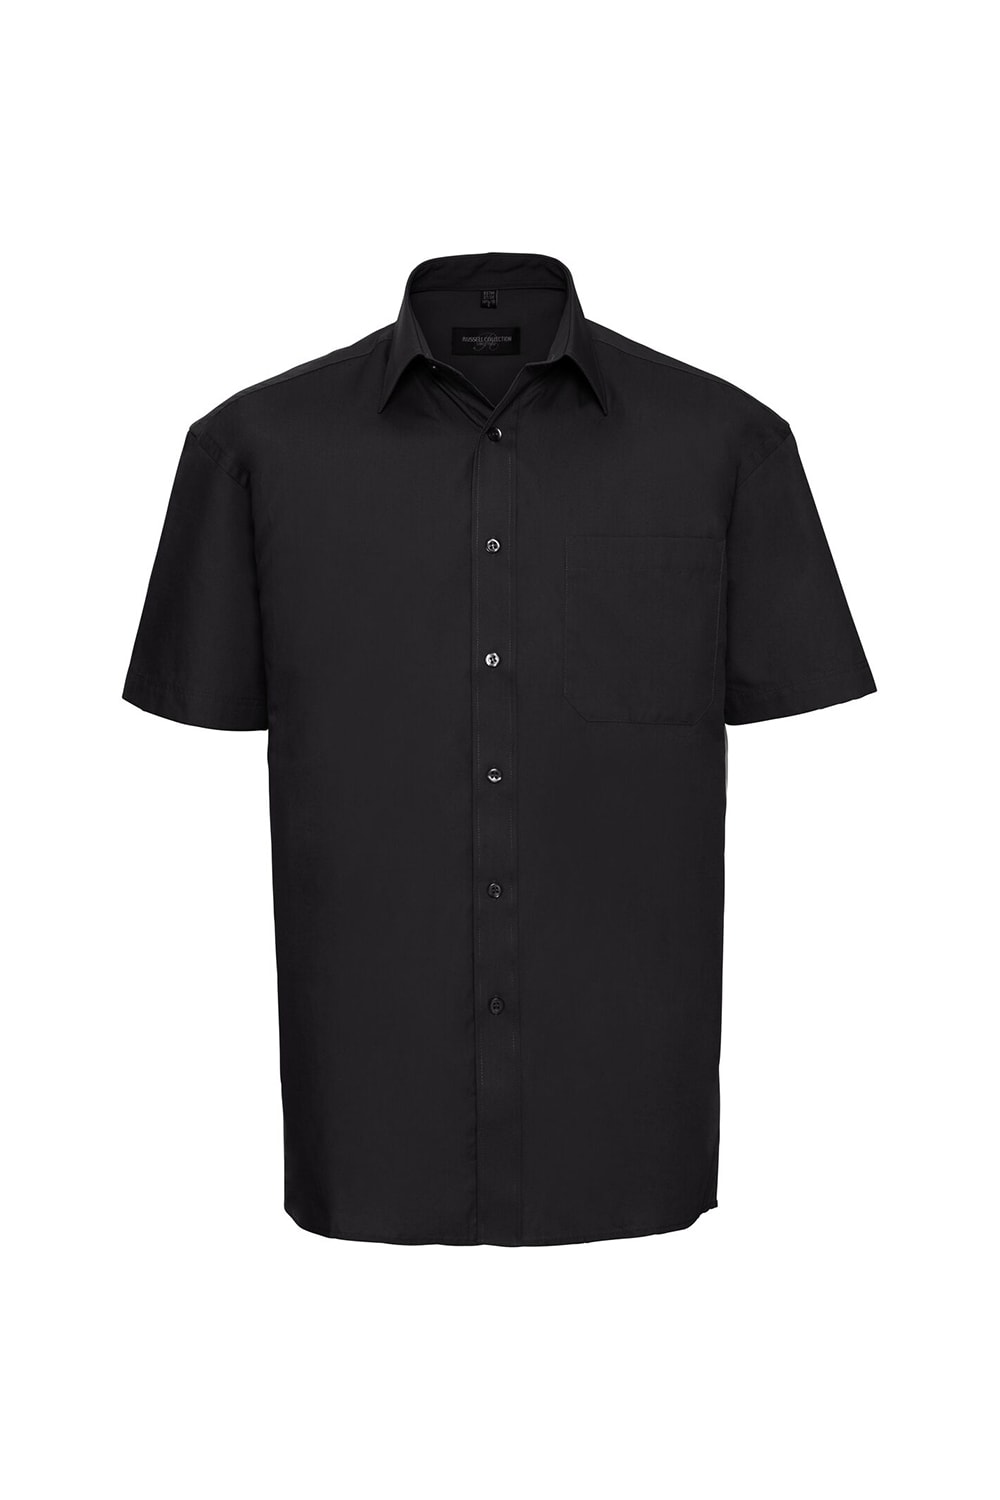 Russell Collection Mens Short Sleeve Pure Cotton Easy Care Poplin Shirt (Black)